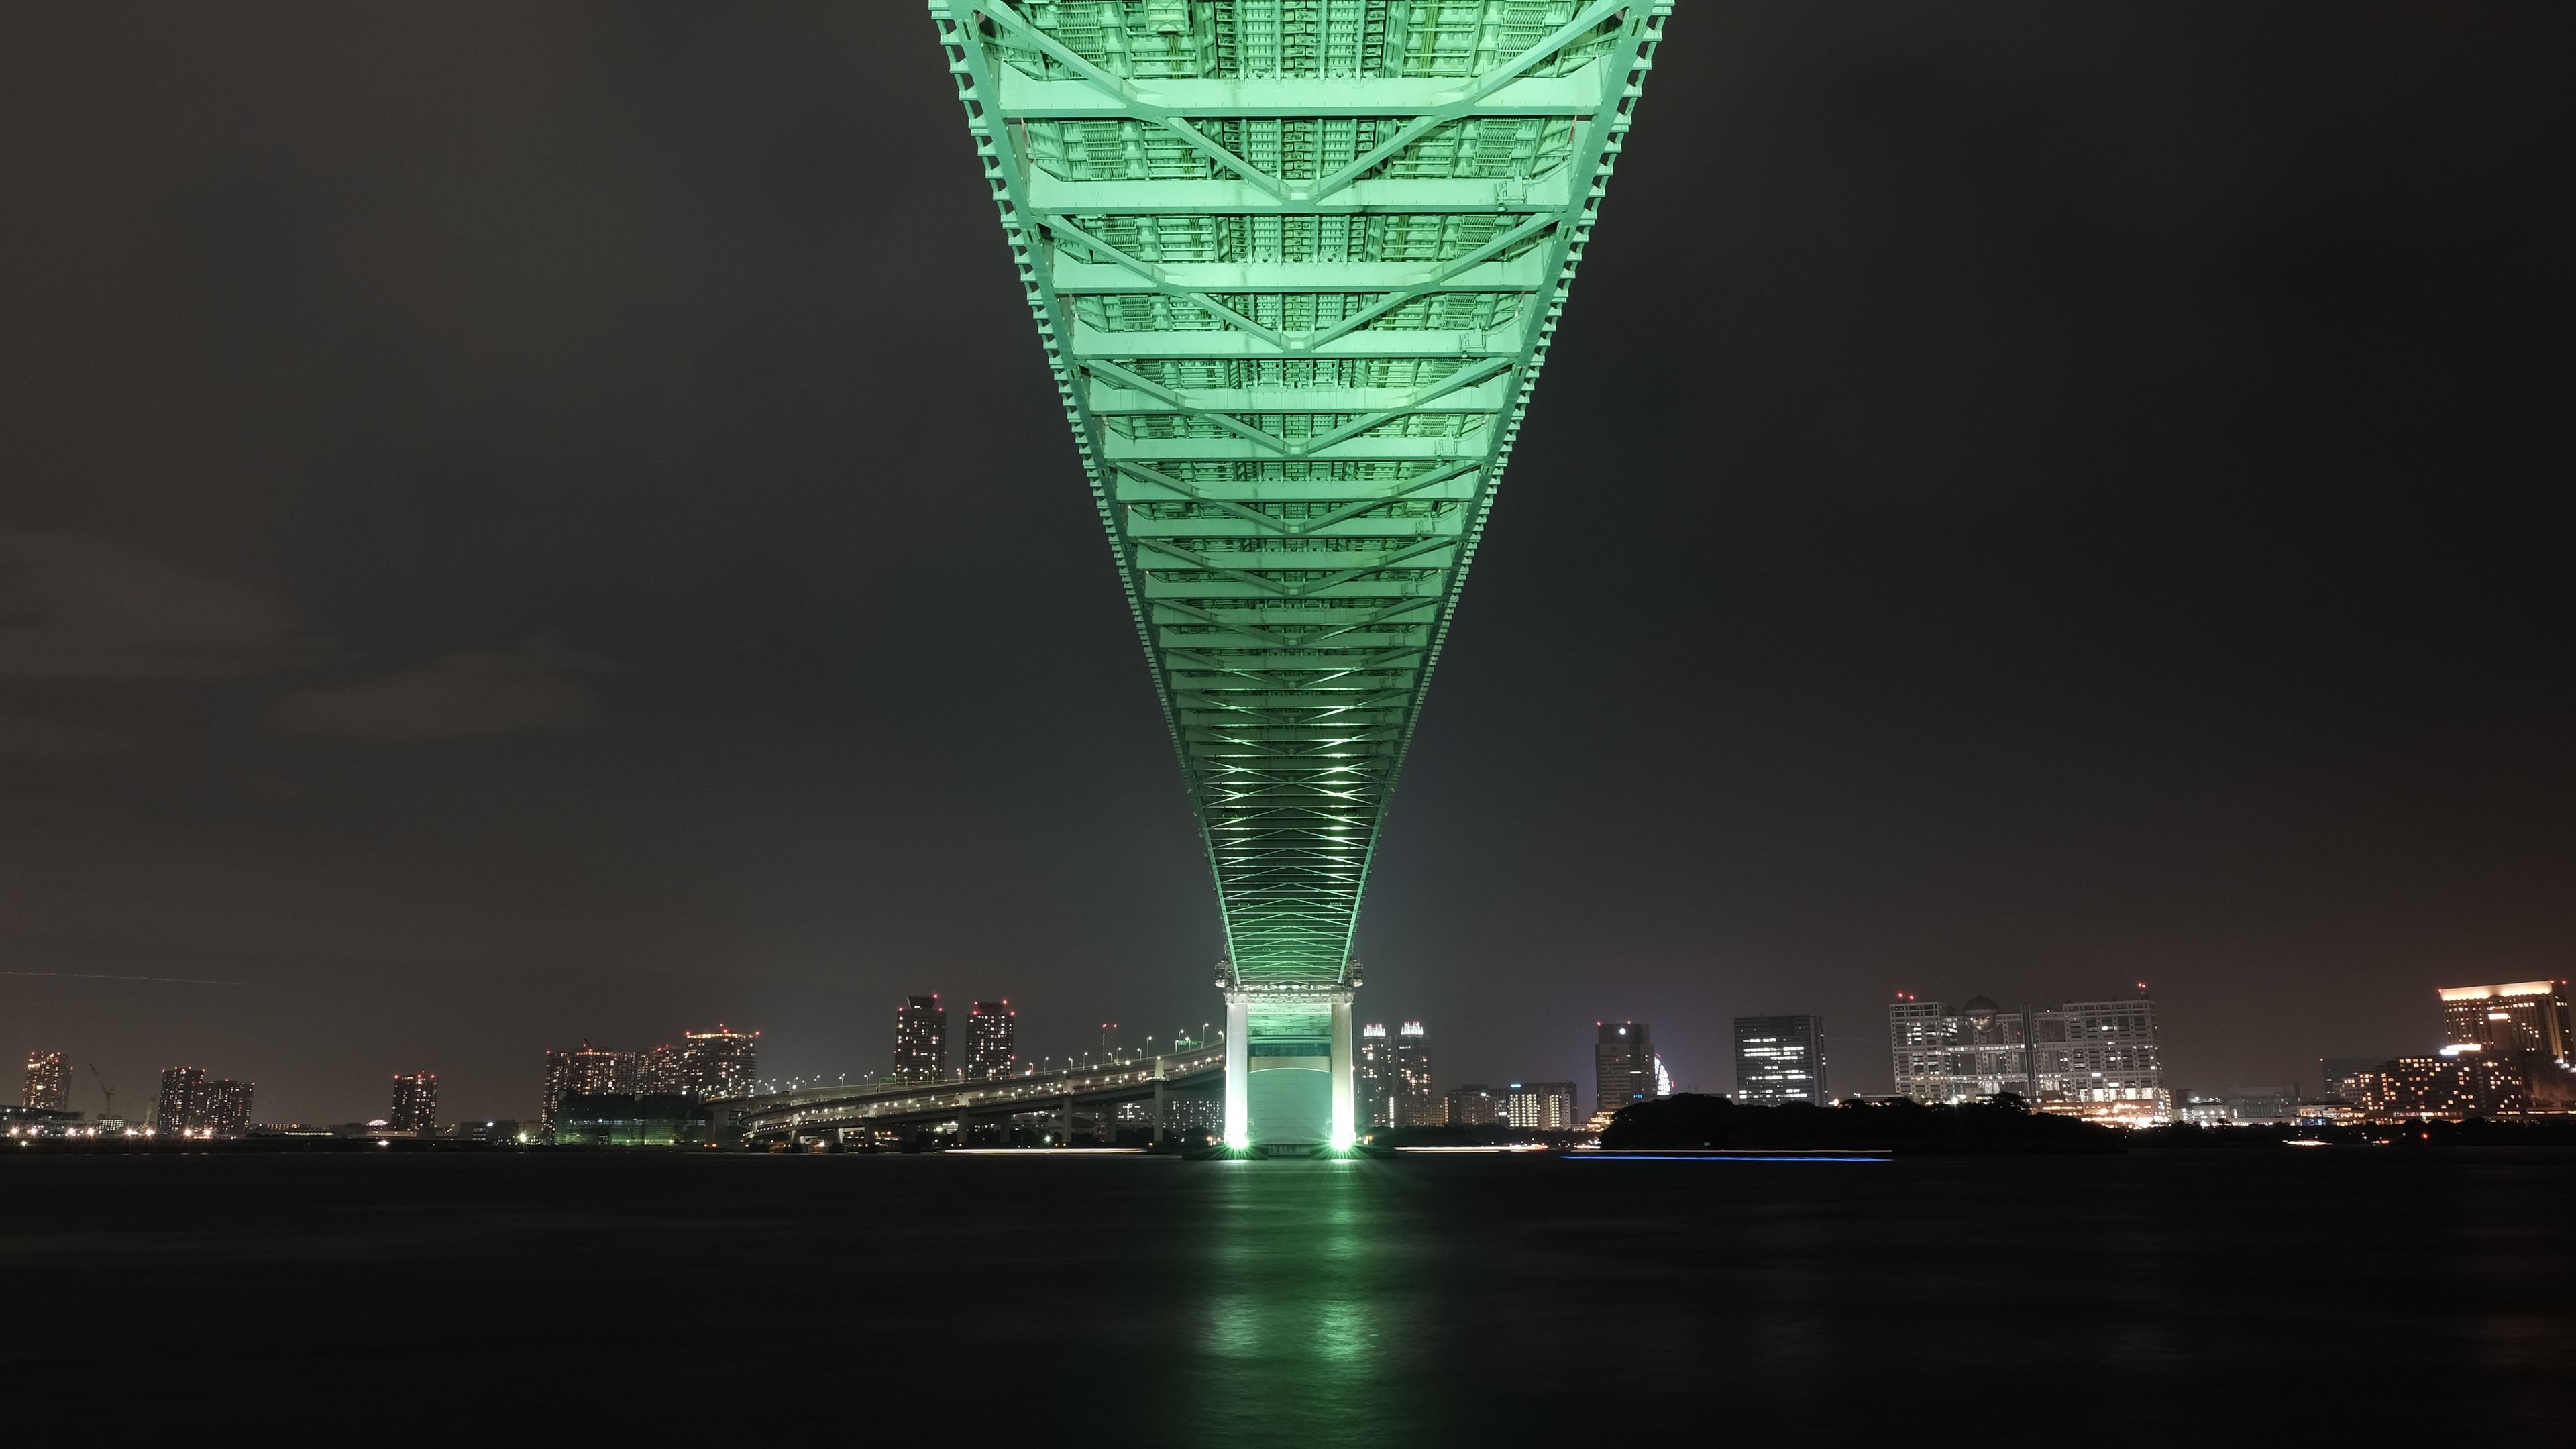 A night bridge over a river in Japan